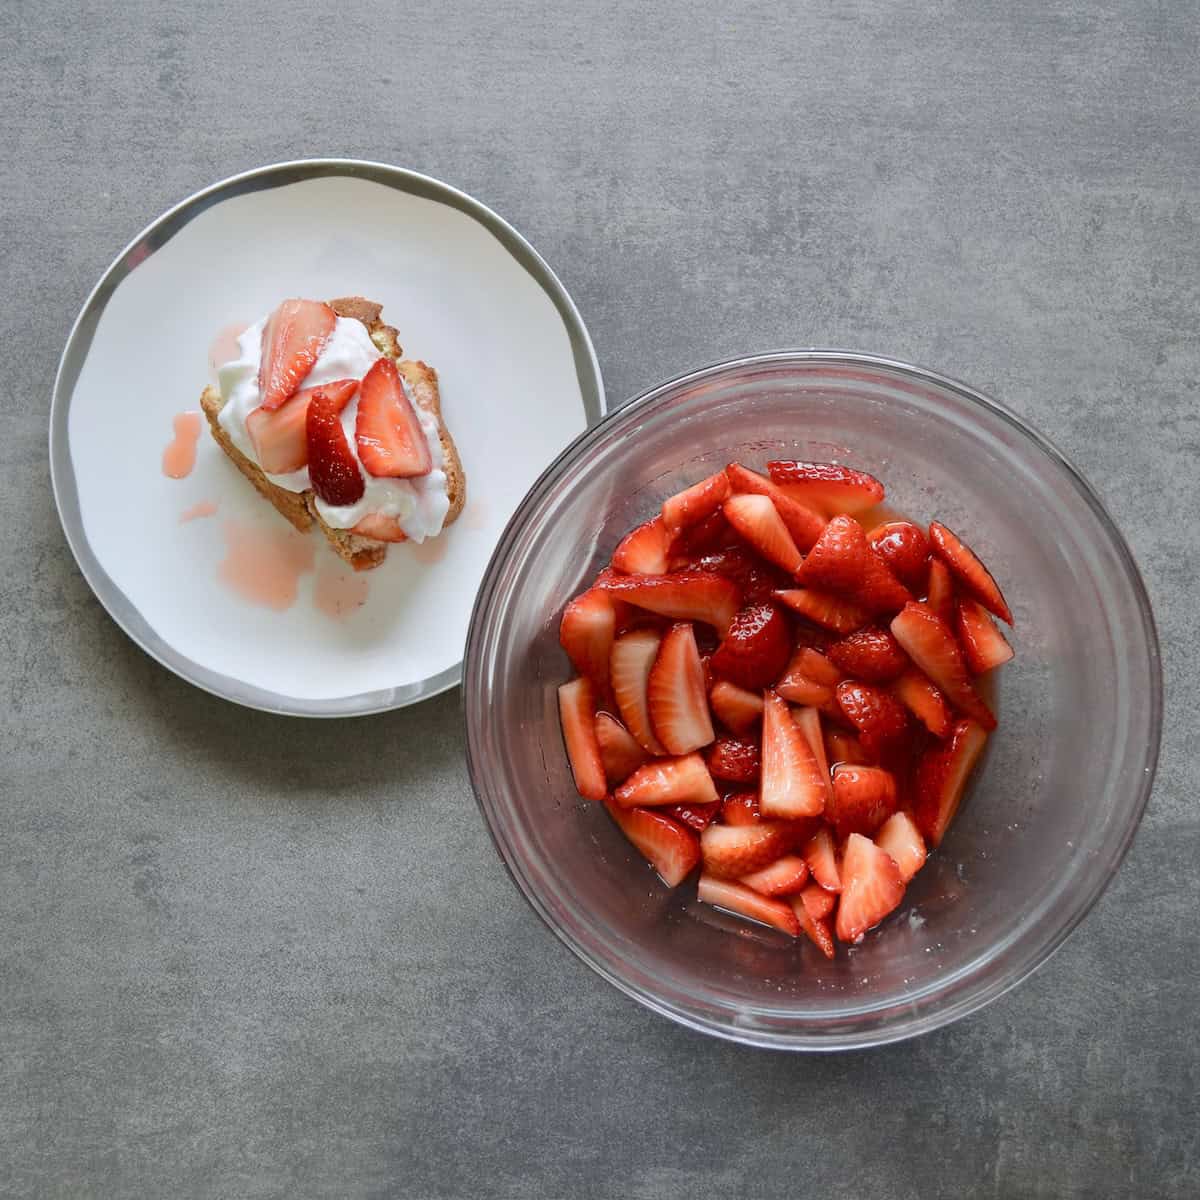 Plated shortcake and bowl of macerated strawberries